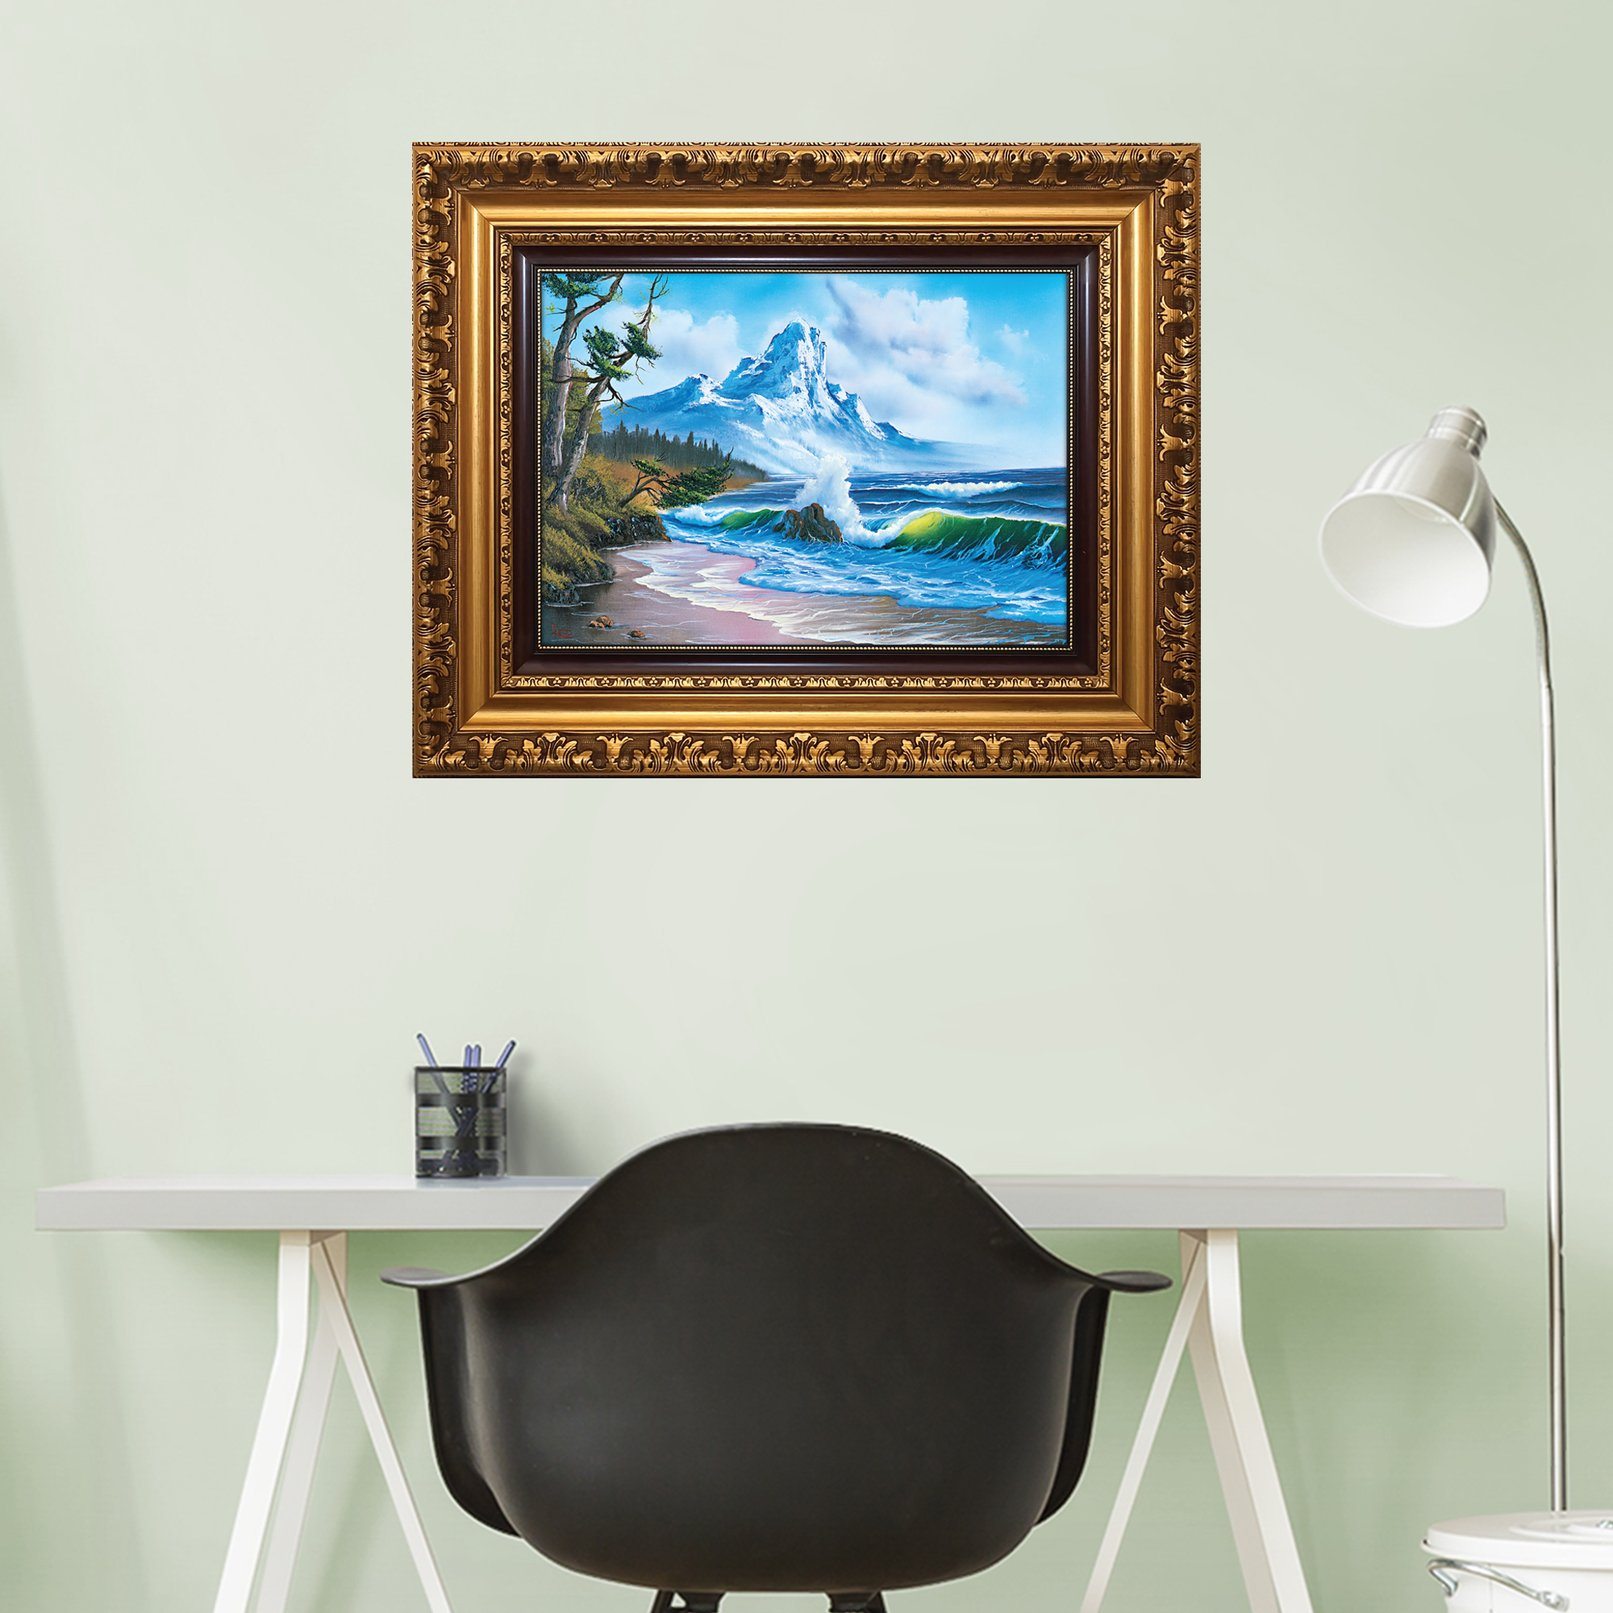 https://fathead.com/collections/bob-ross/products/m1700-00036?variant=33181831823448